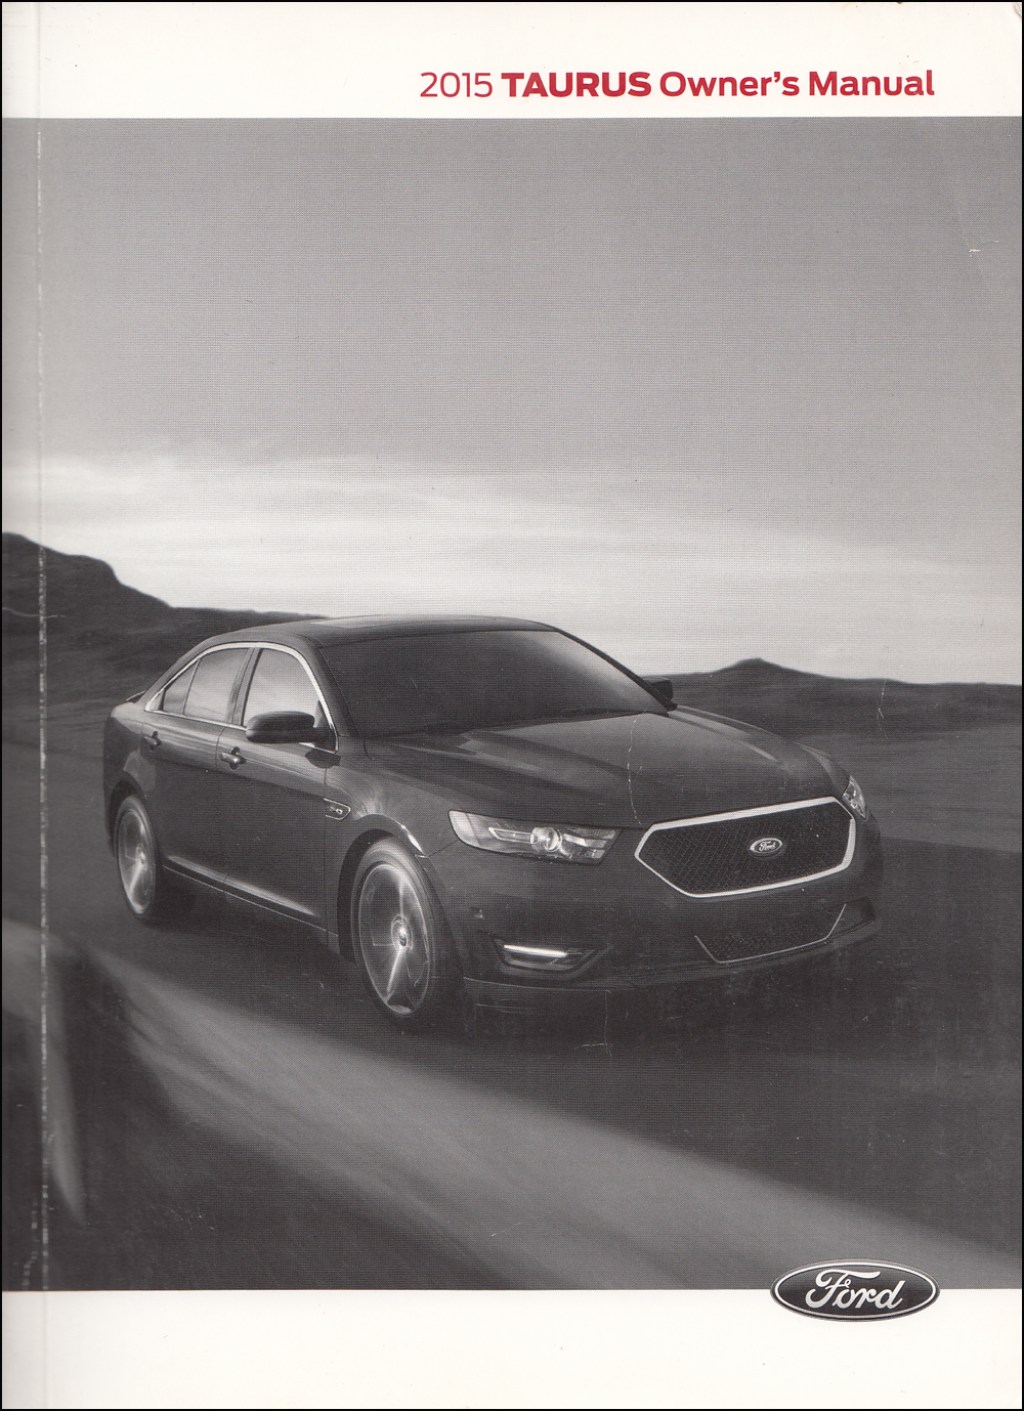 Picture of: Ford Taurus Owner’s Manual Original